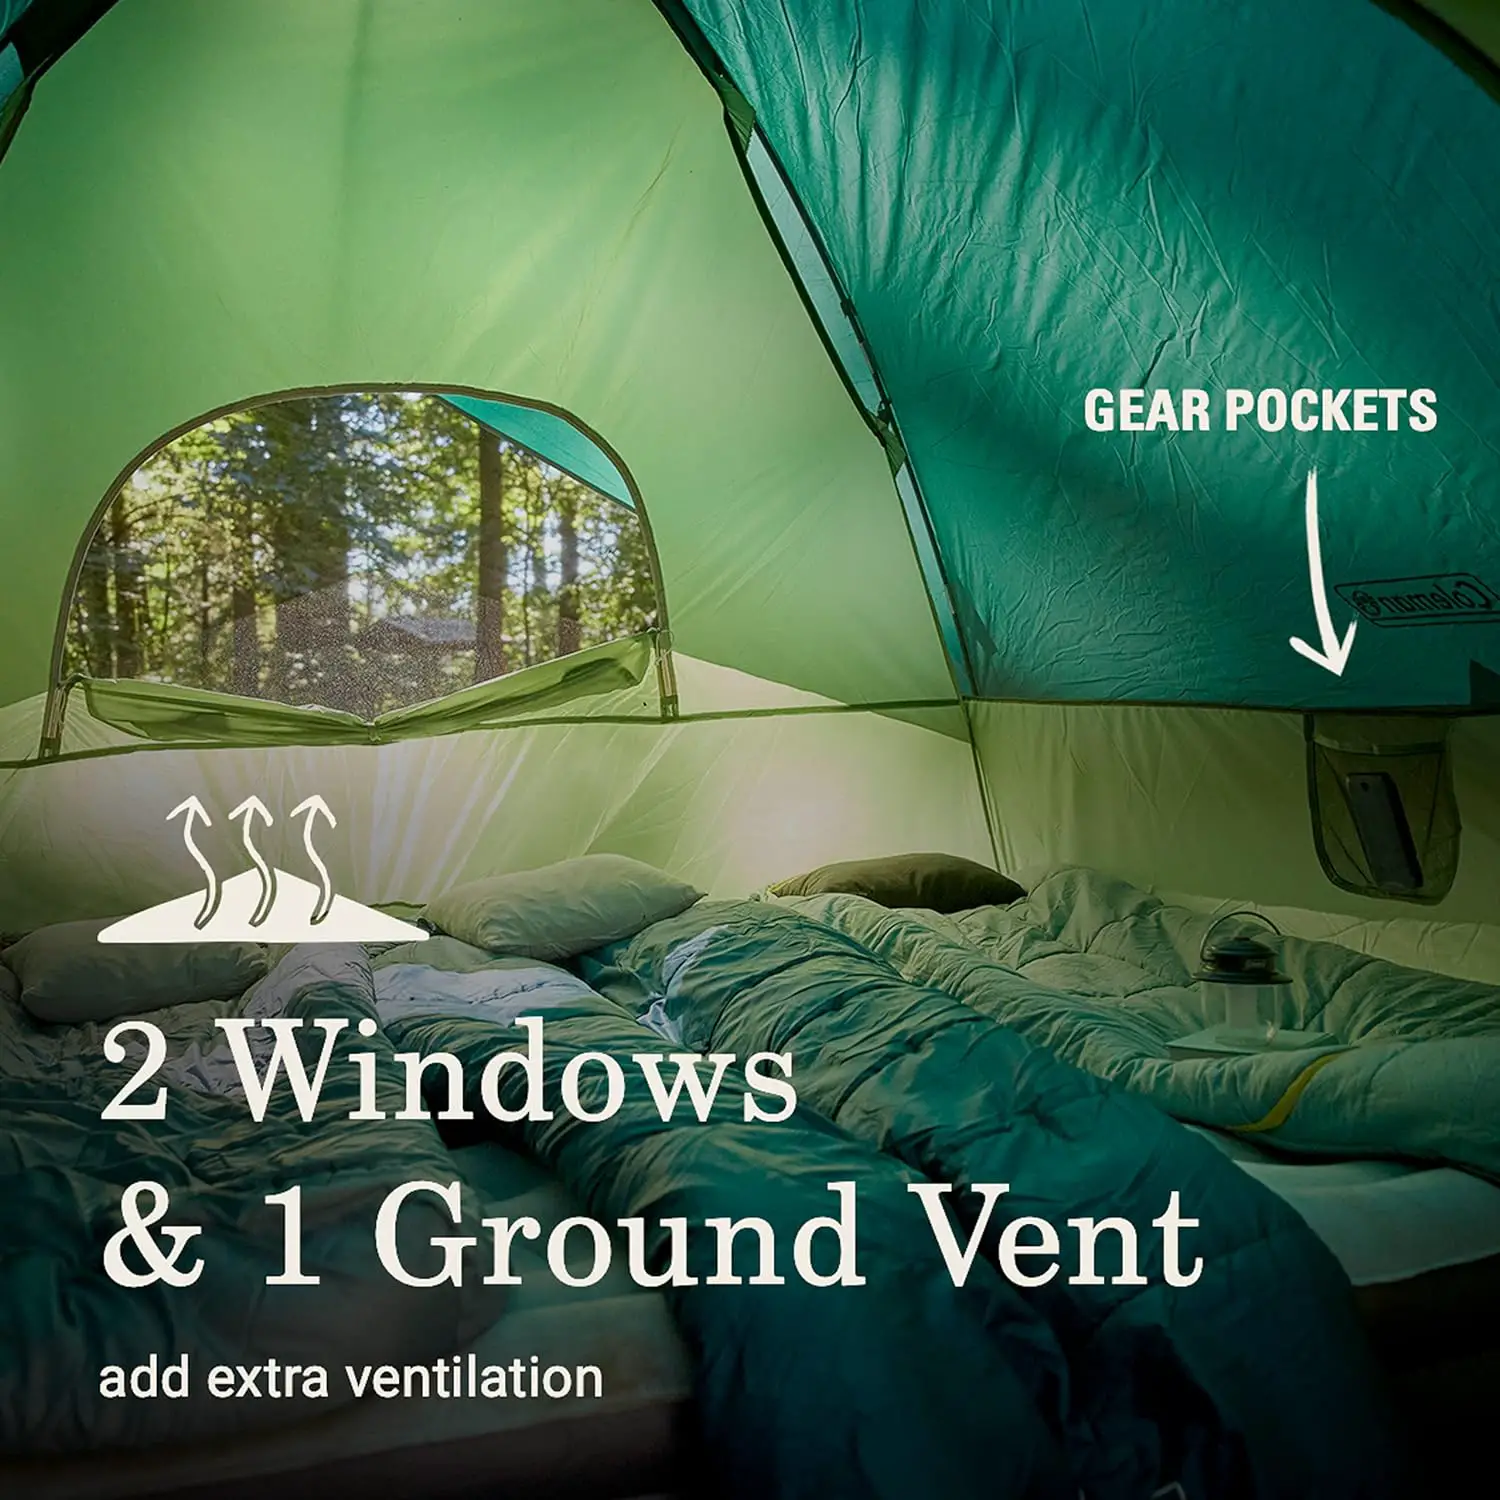 Coleman Sundome Camping Tent Review